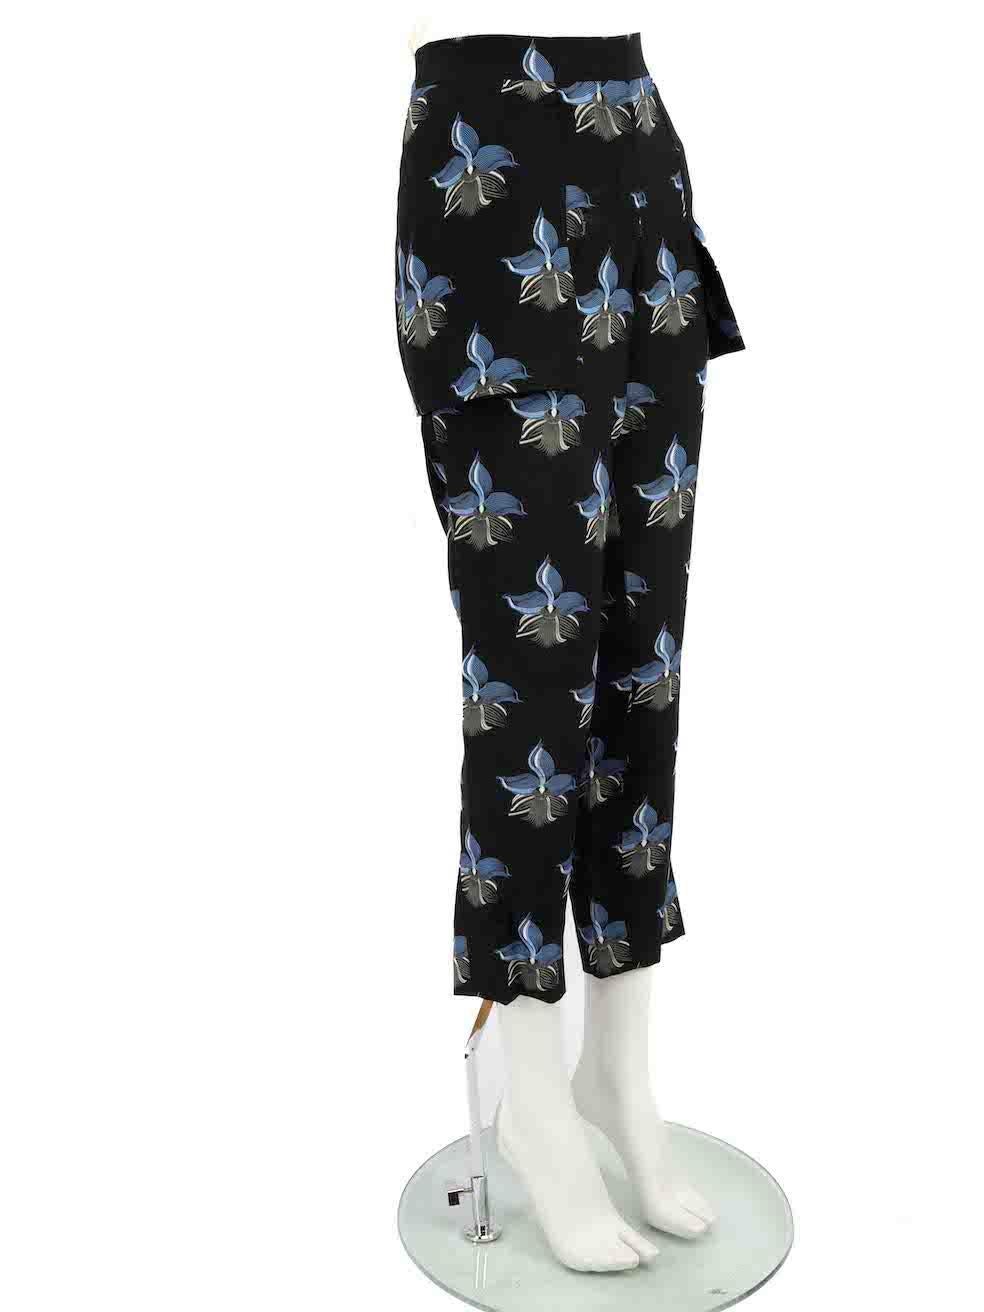 CONDITION is Very good. Hardly any visible wear to trousers is evident on this used Fendi designer resale item.
 
 Details
 Black
 Silk
 Trousers
 Blue floral print
 Tapered fit
 High rise
 Cropped
 Back drape panel detail
 Fly zip, hook and button